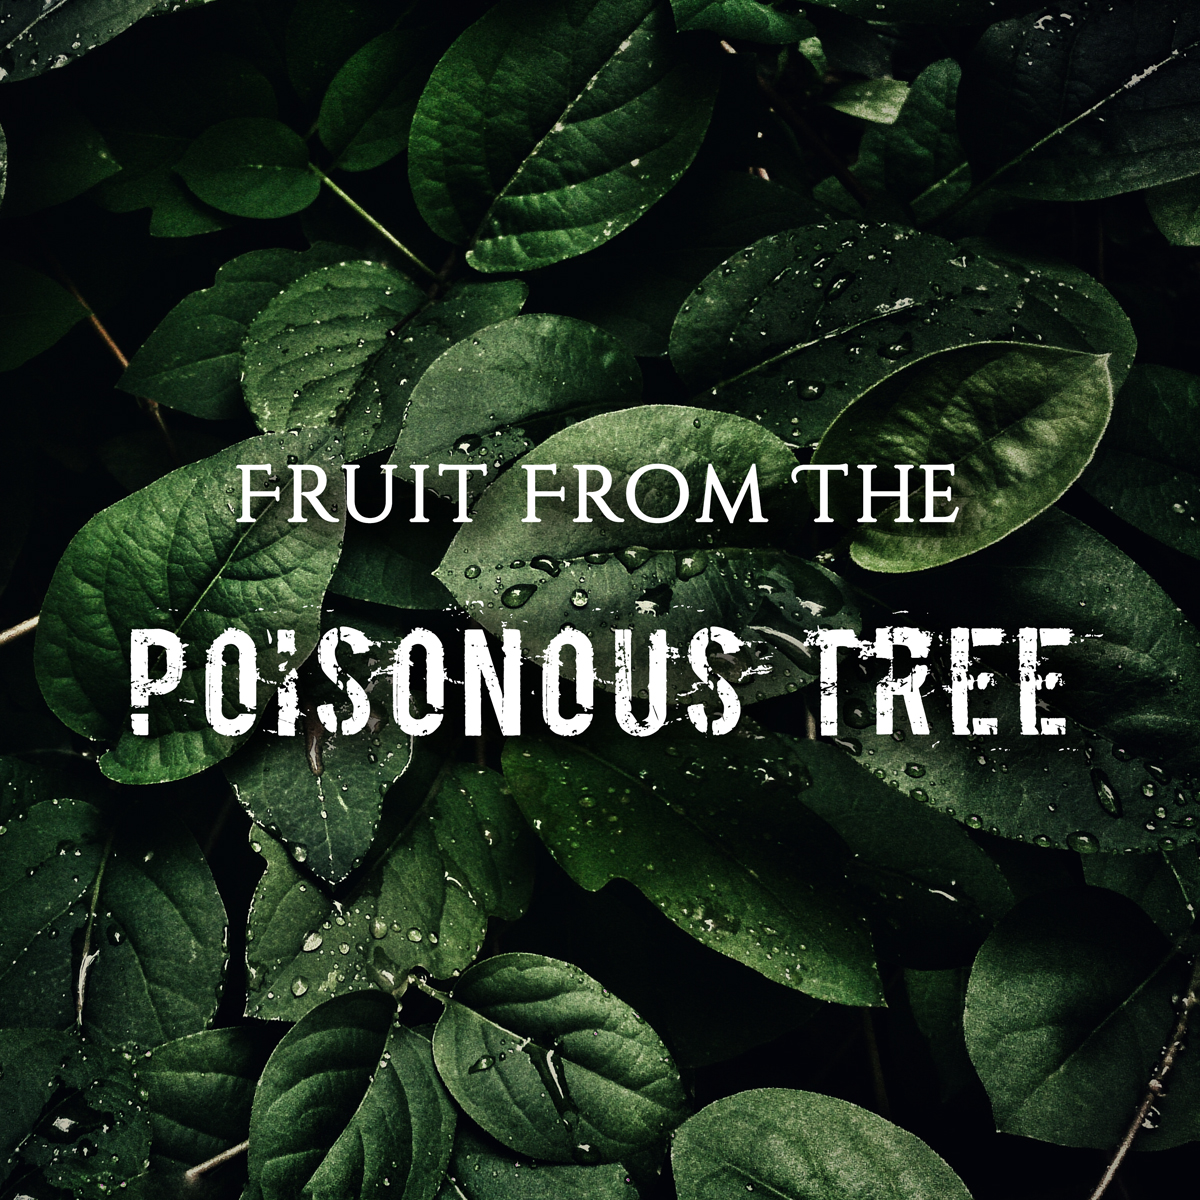 What case established the fruit of poisonous tree doctrine